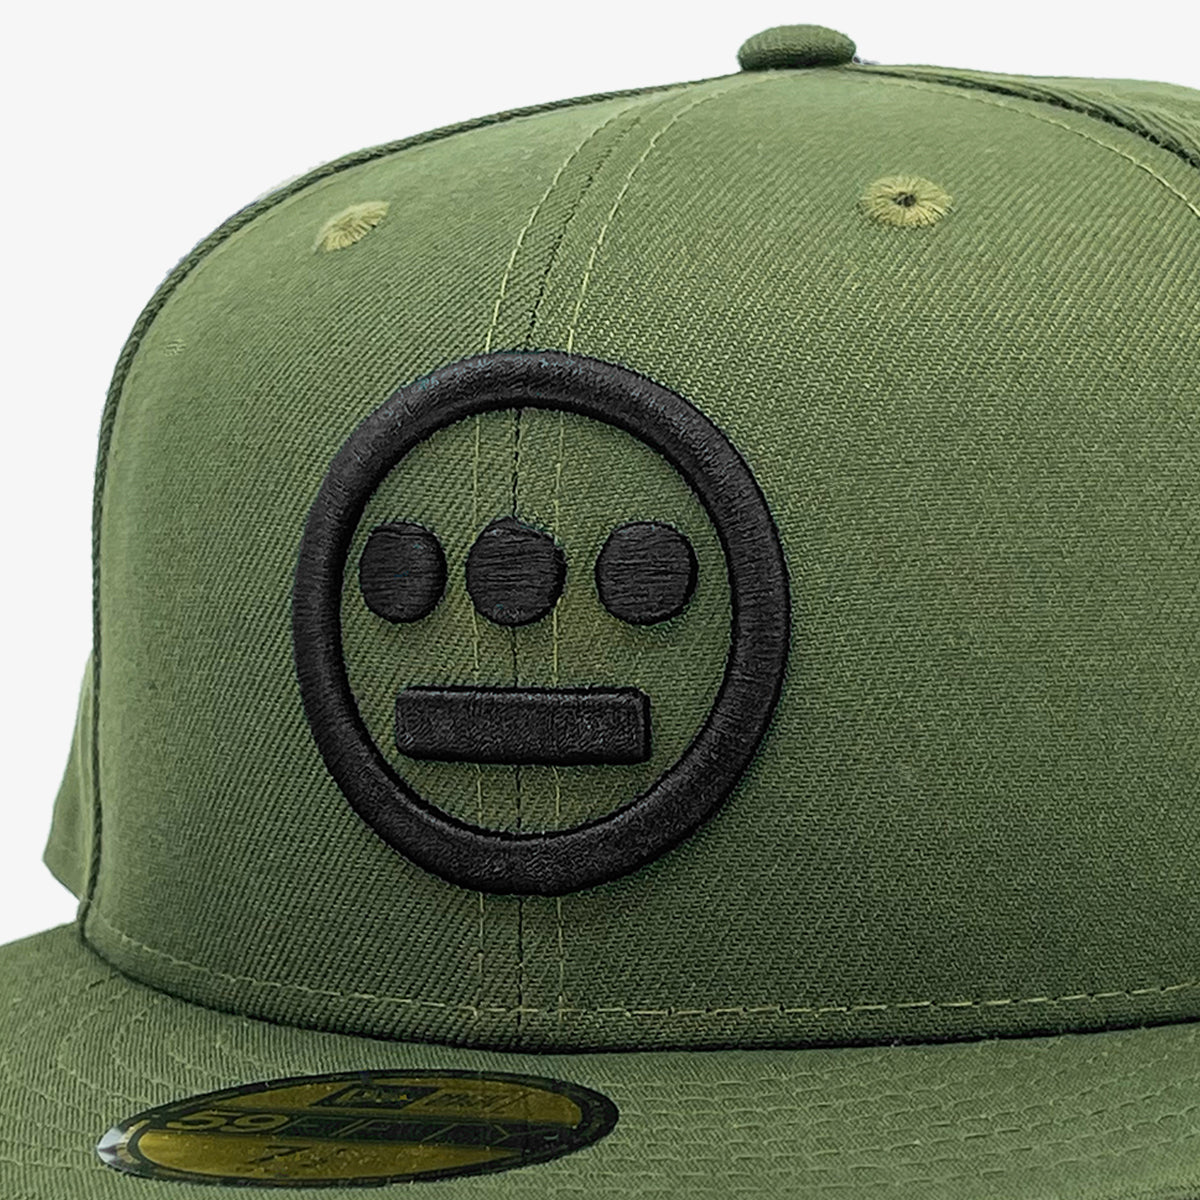 Close-up of black embroidered Hieroglyphics hip-hop logo on the crown of a green New Era cap.